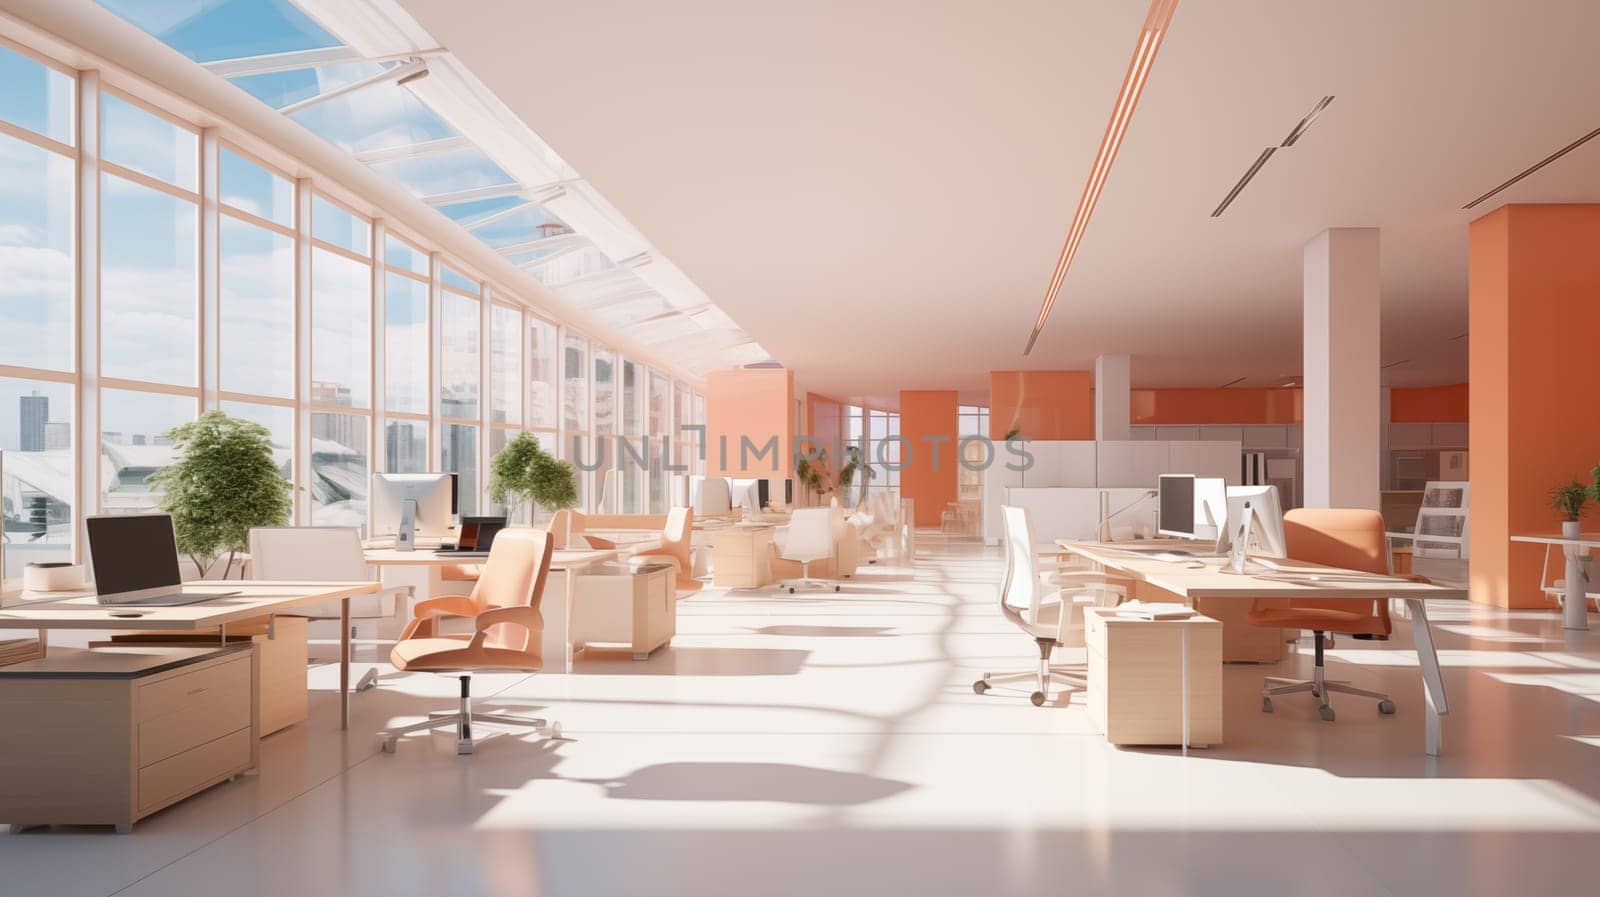 Modern office interior in light peach color, modern workspace with natural lighting from large windows.